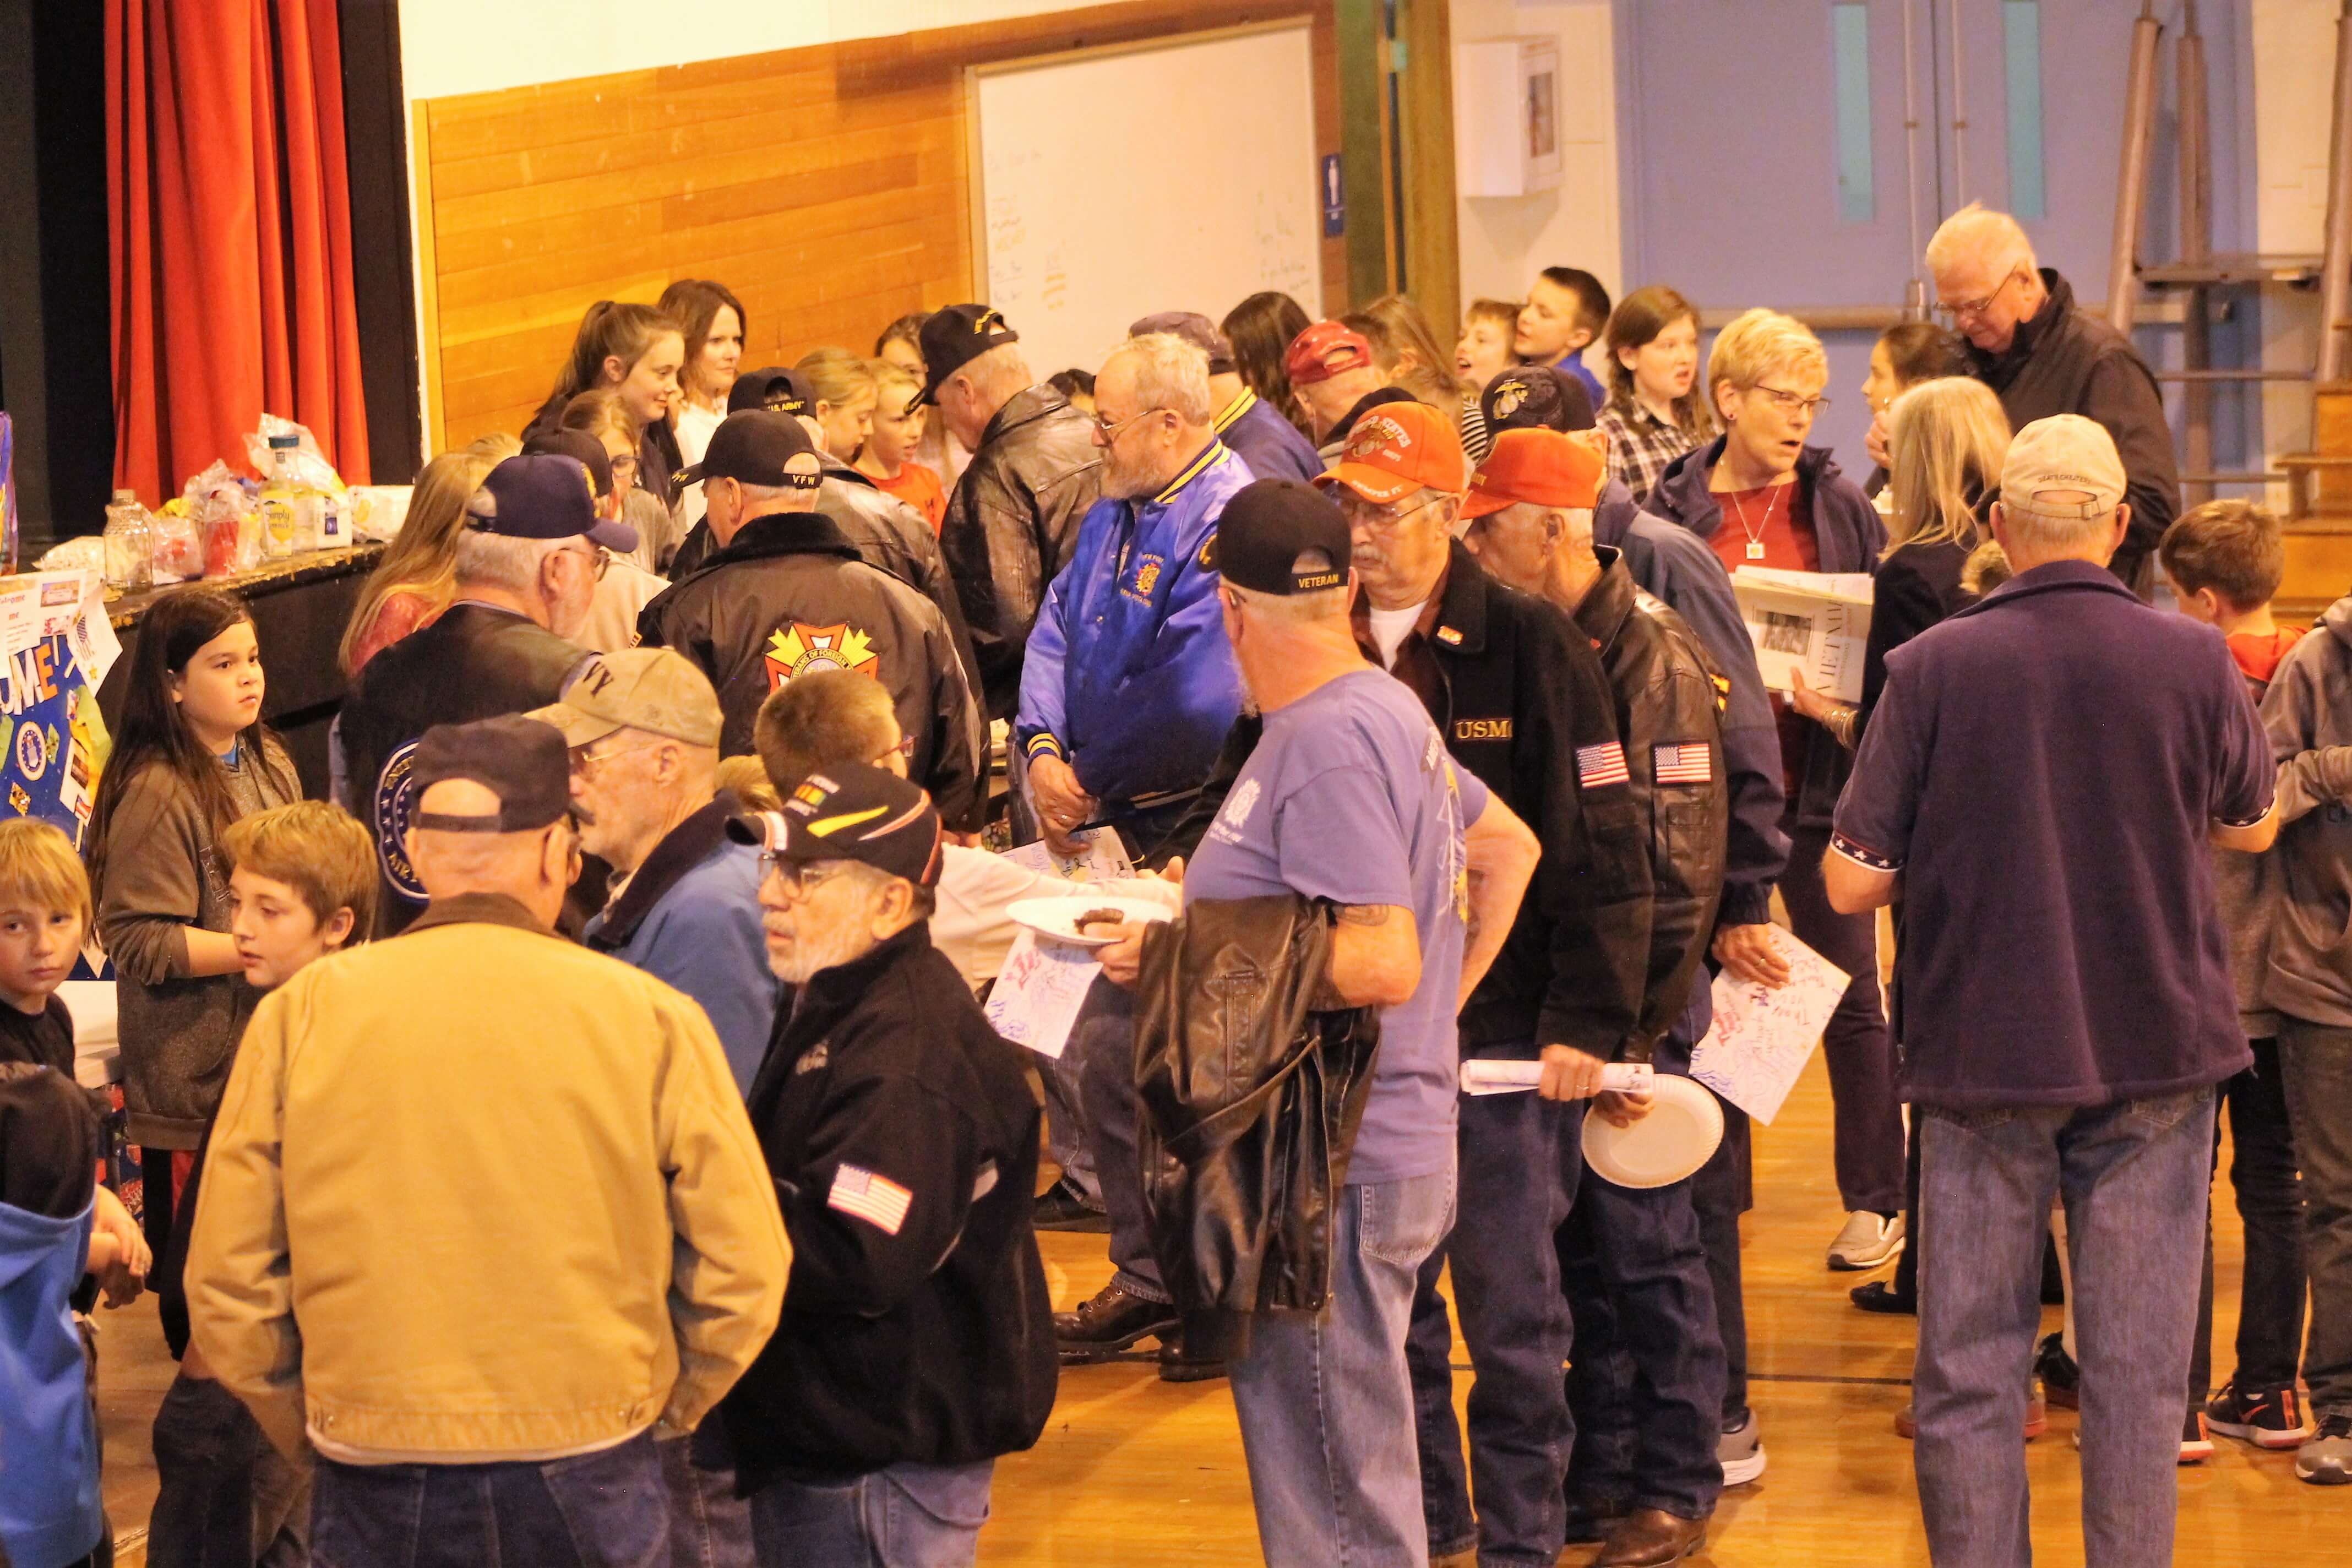 Contemporary image of veterans gathered in a gymnasium, eating from plates of food.